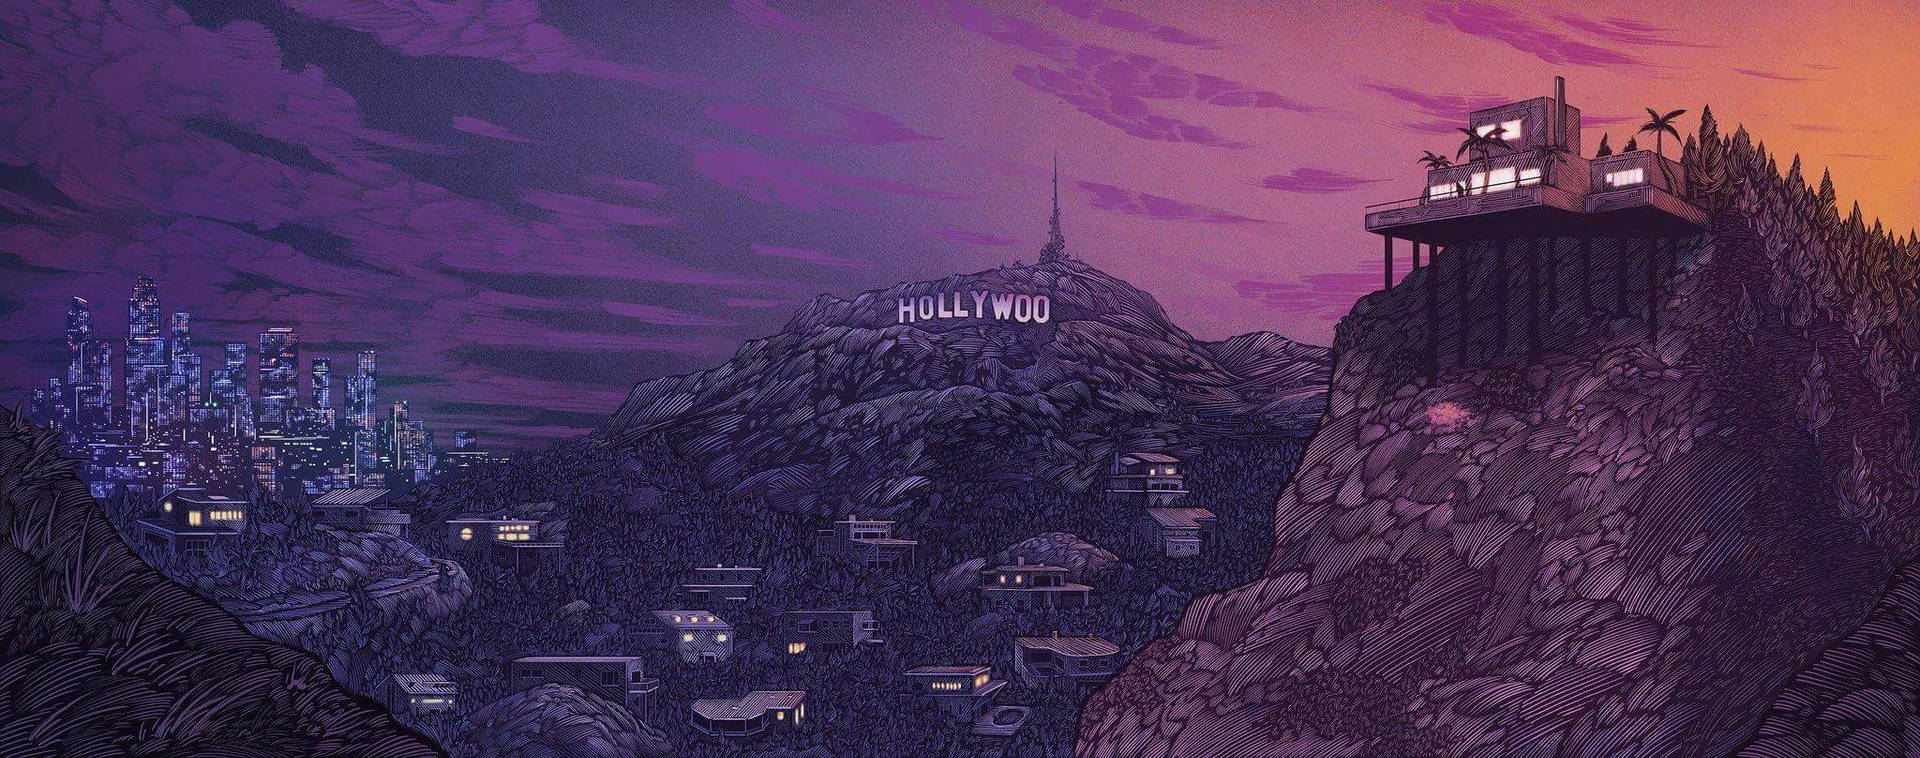 Bojack Horseman paints a portrait of his life in Hollywoo Wallpaper